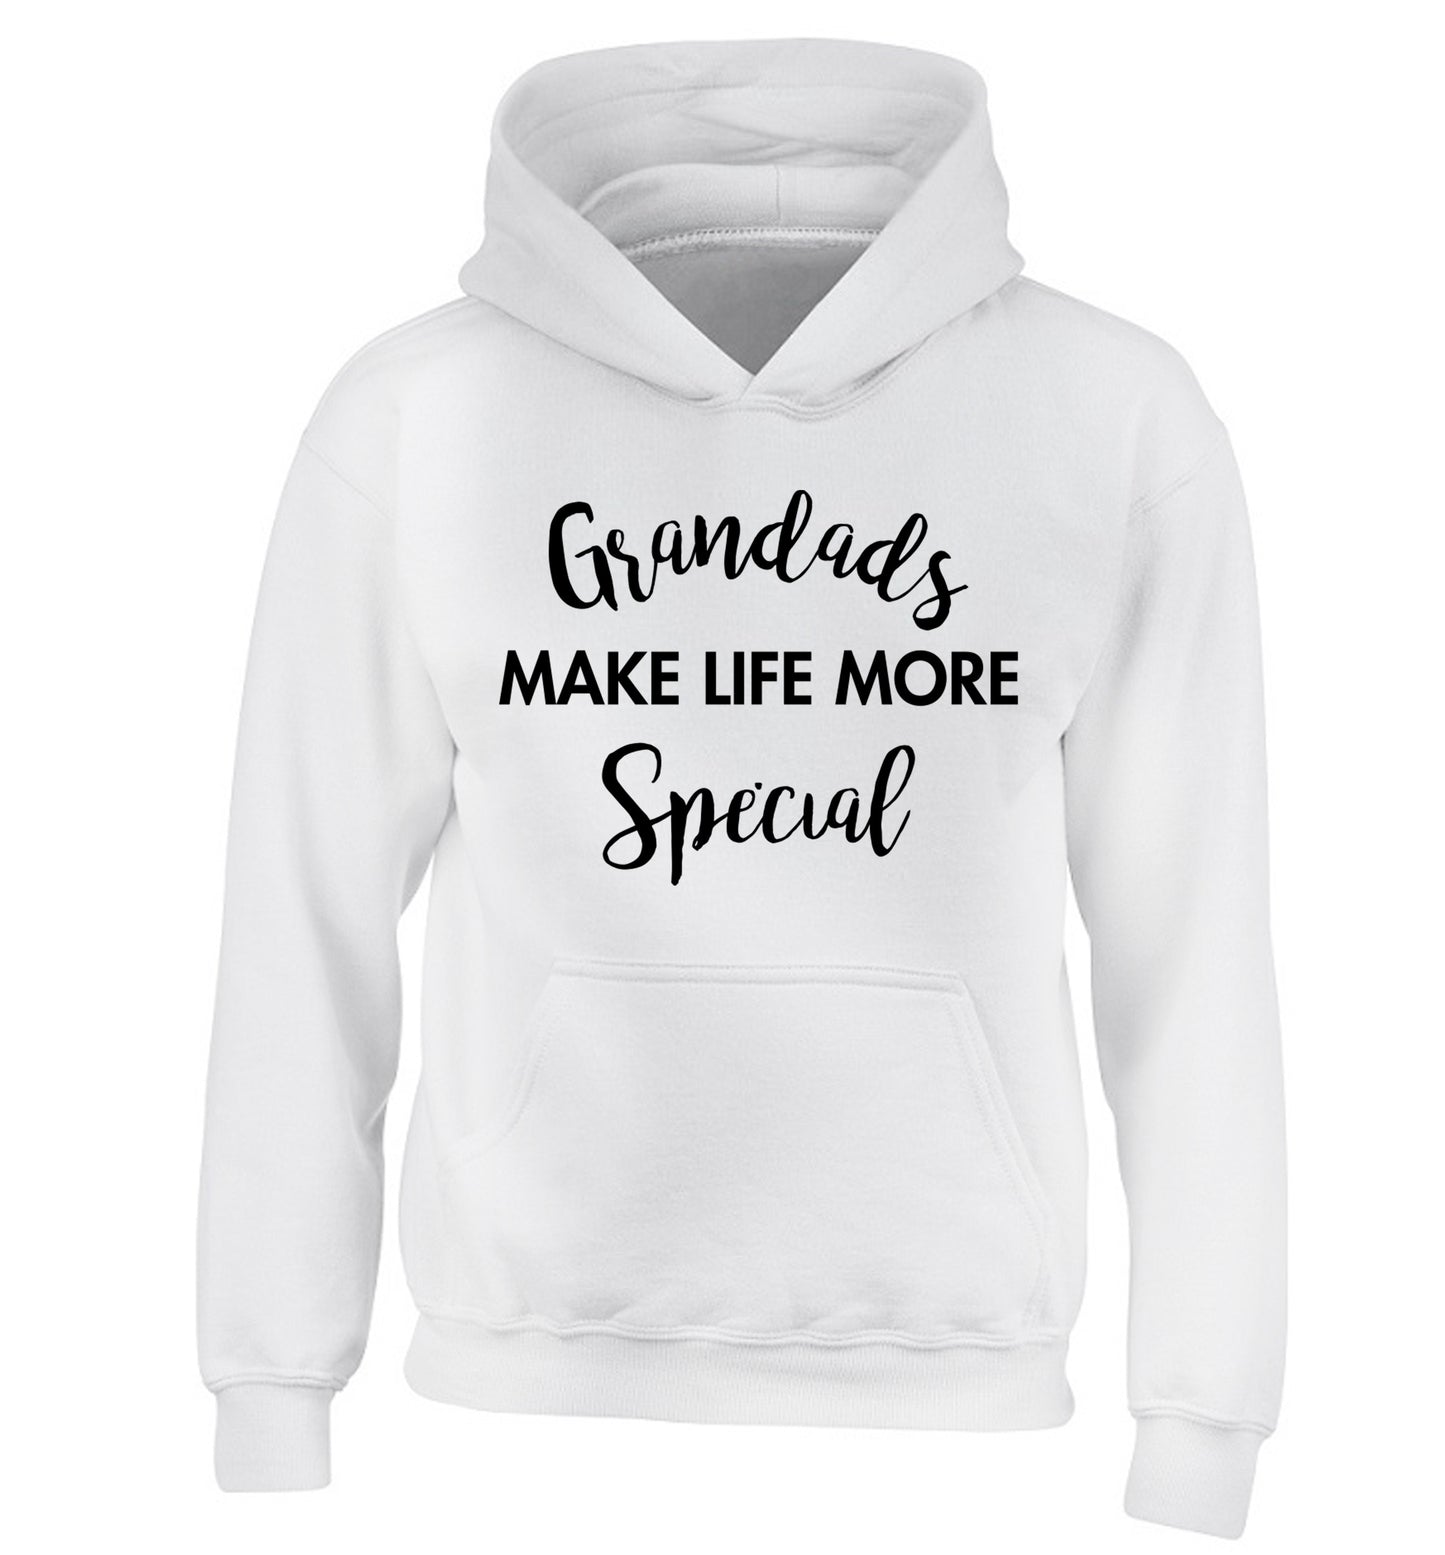 Grandads make life more special children's white hoodie 12-14 Years